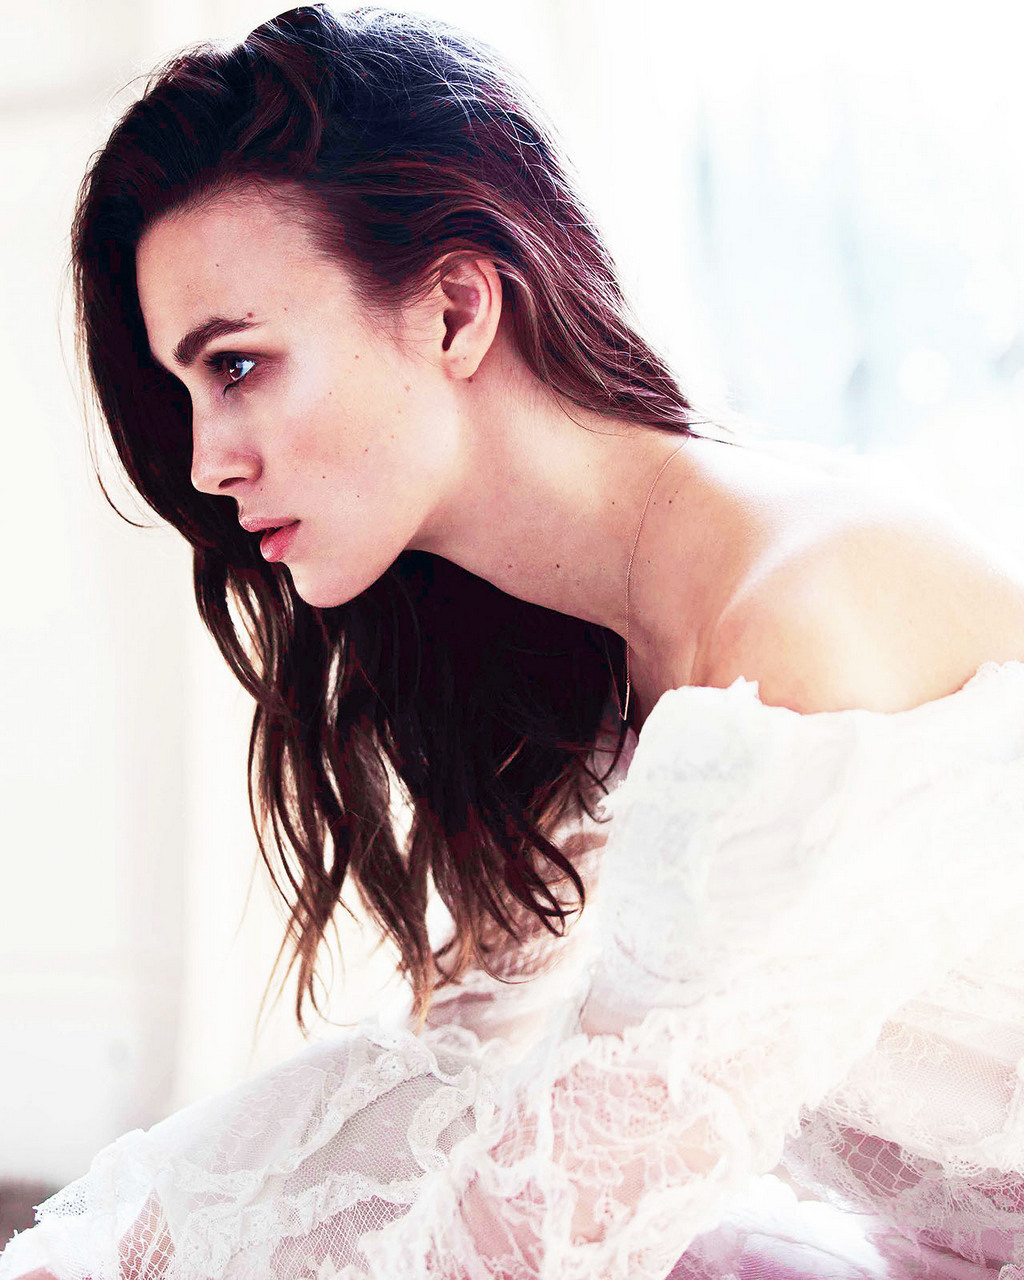 Keira Knightley For The Edit